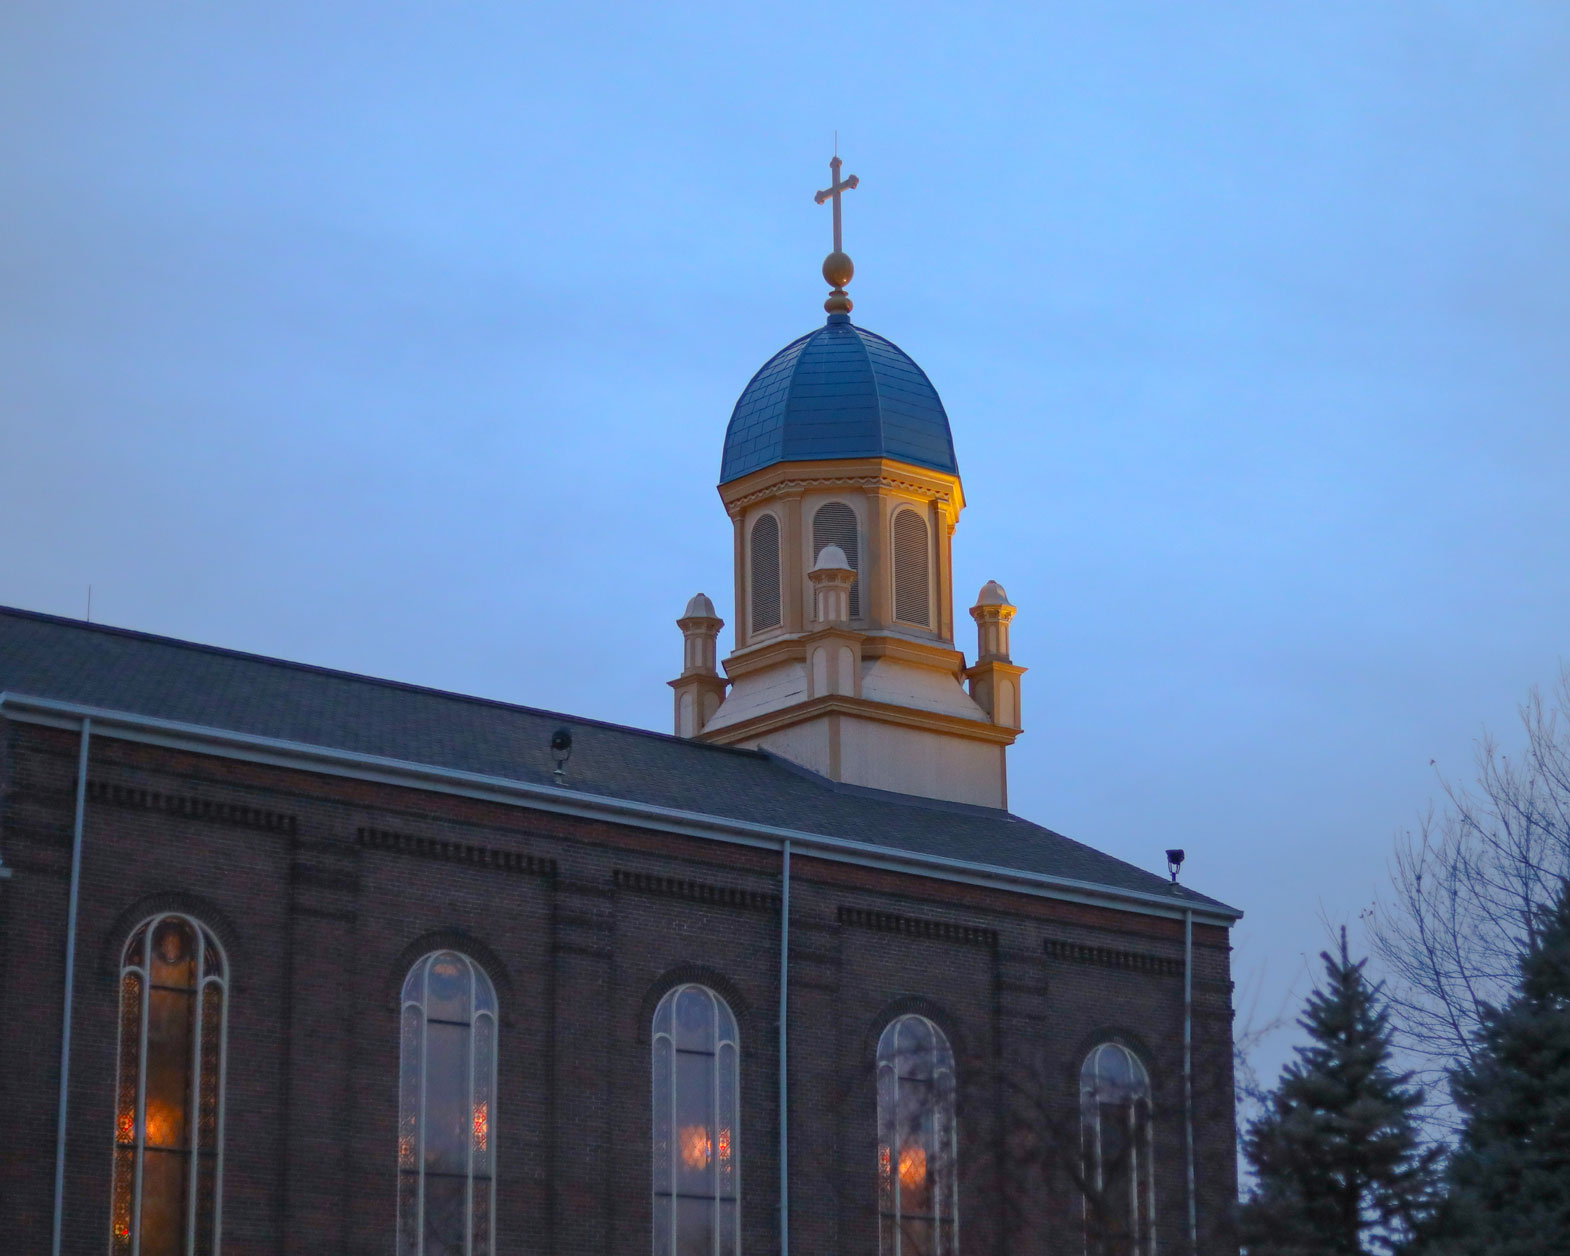 The back of the chapel, as visible from Chaminade Hall.